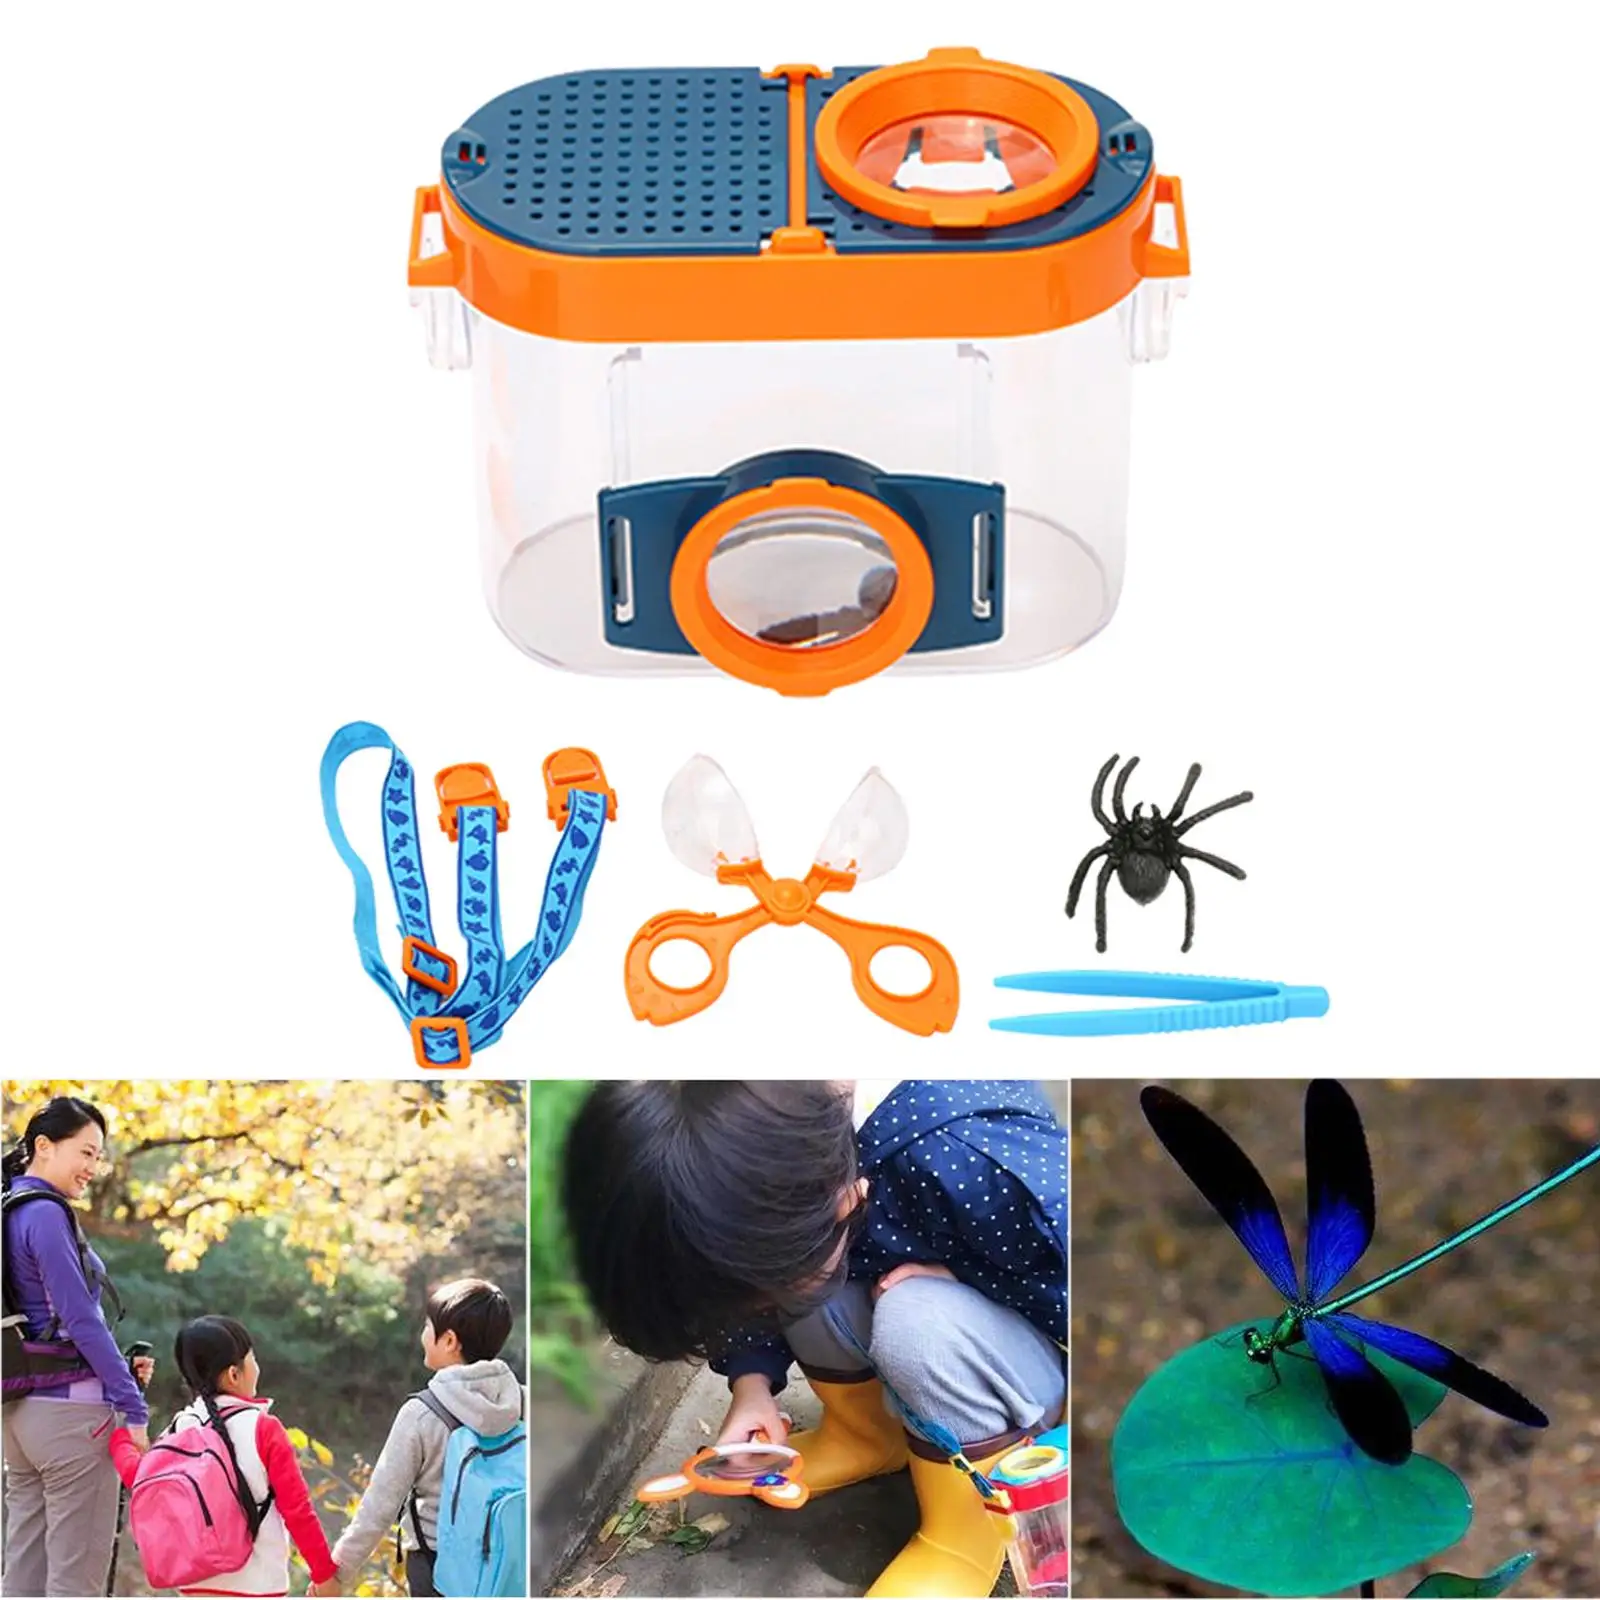  Viewer with Magnify  Backyard Explorer Outdoor Toy   Viewer Magnifying Viewers for Kids Children Educational